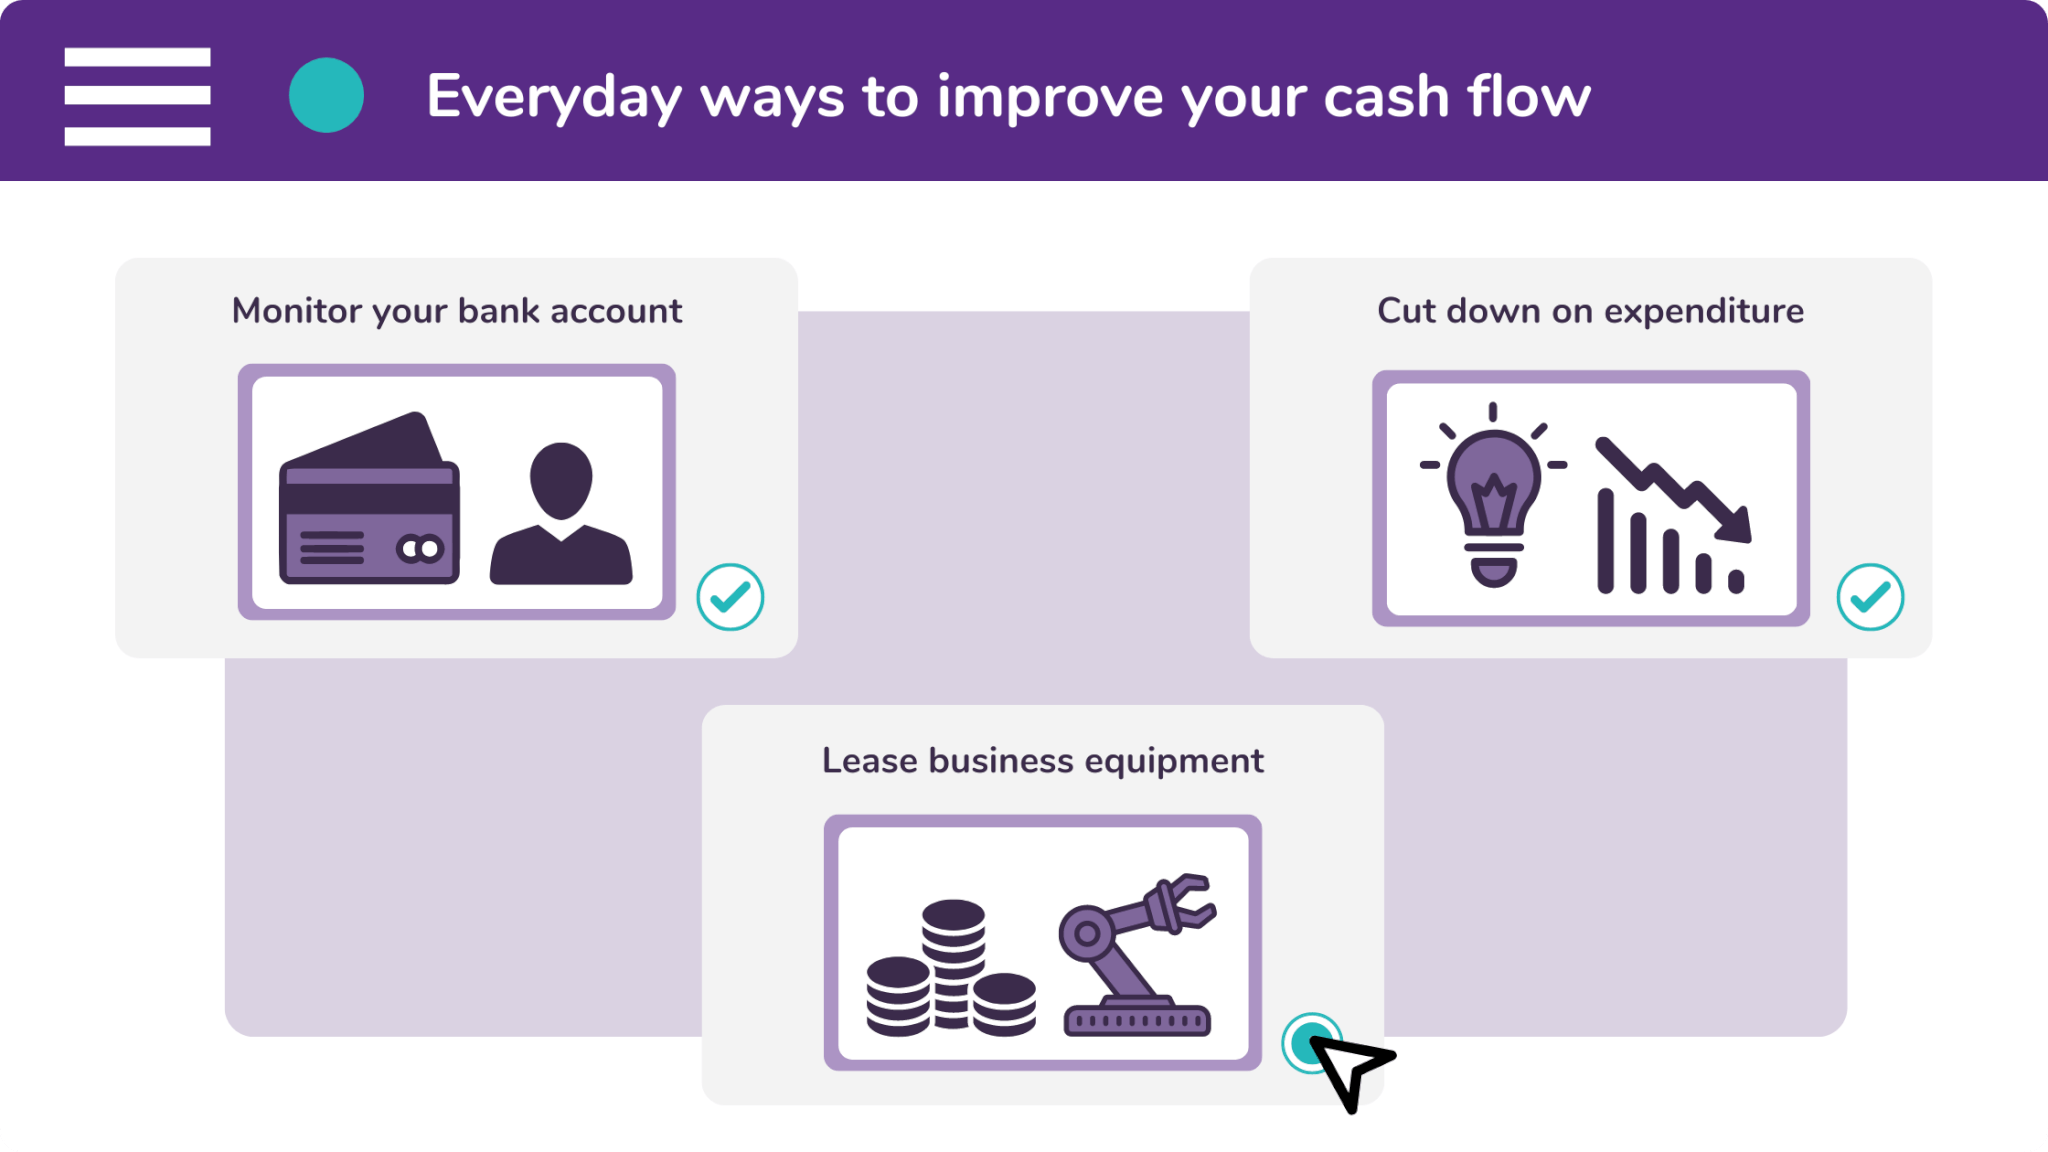 There are three ways to improve your cash flow: monitor your bank account, cut down on expenditure, and lease business equipment.